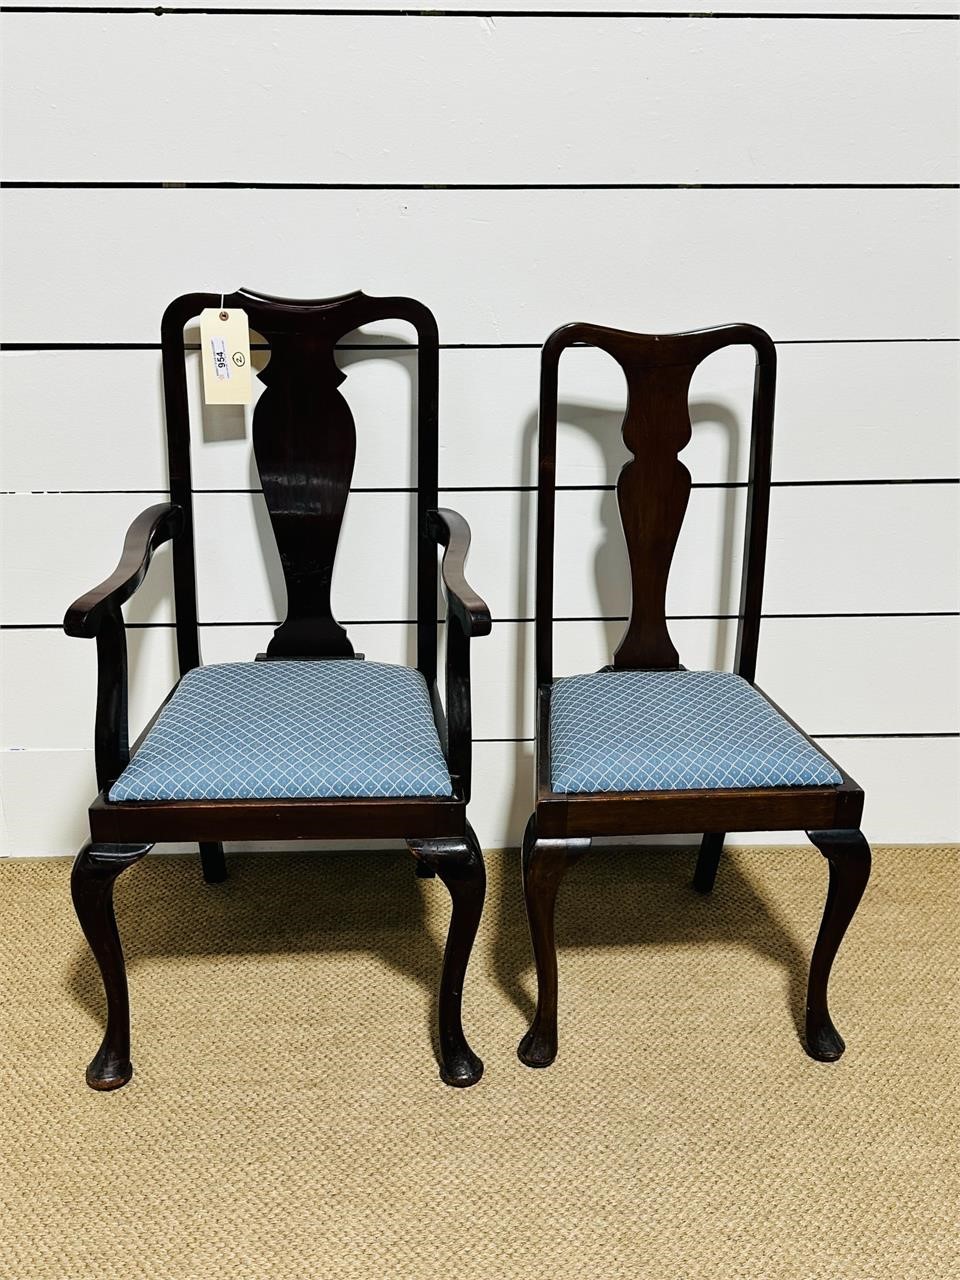 (2) Vintage Occasional Chairs